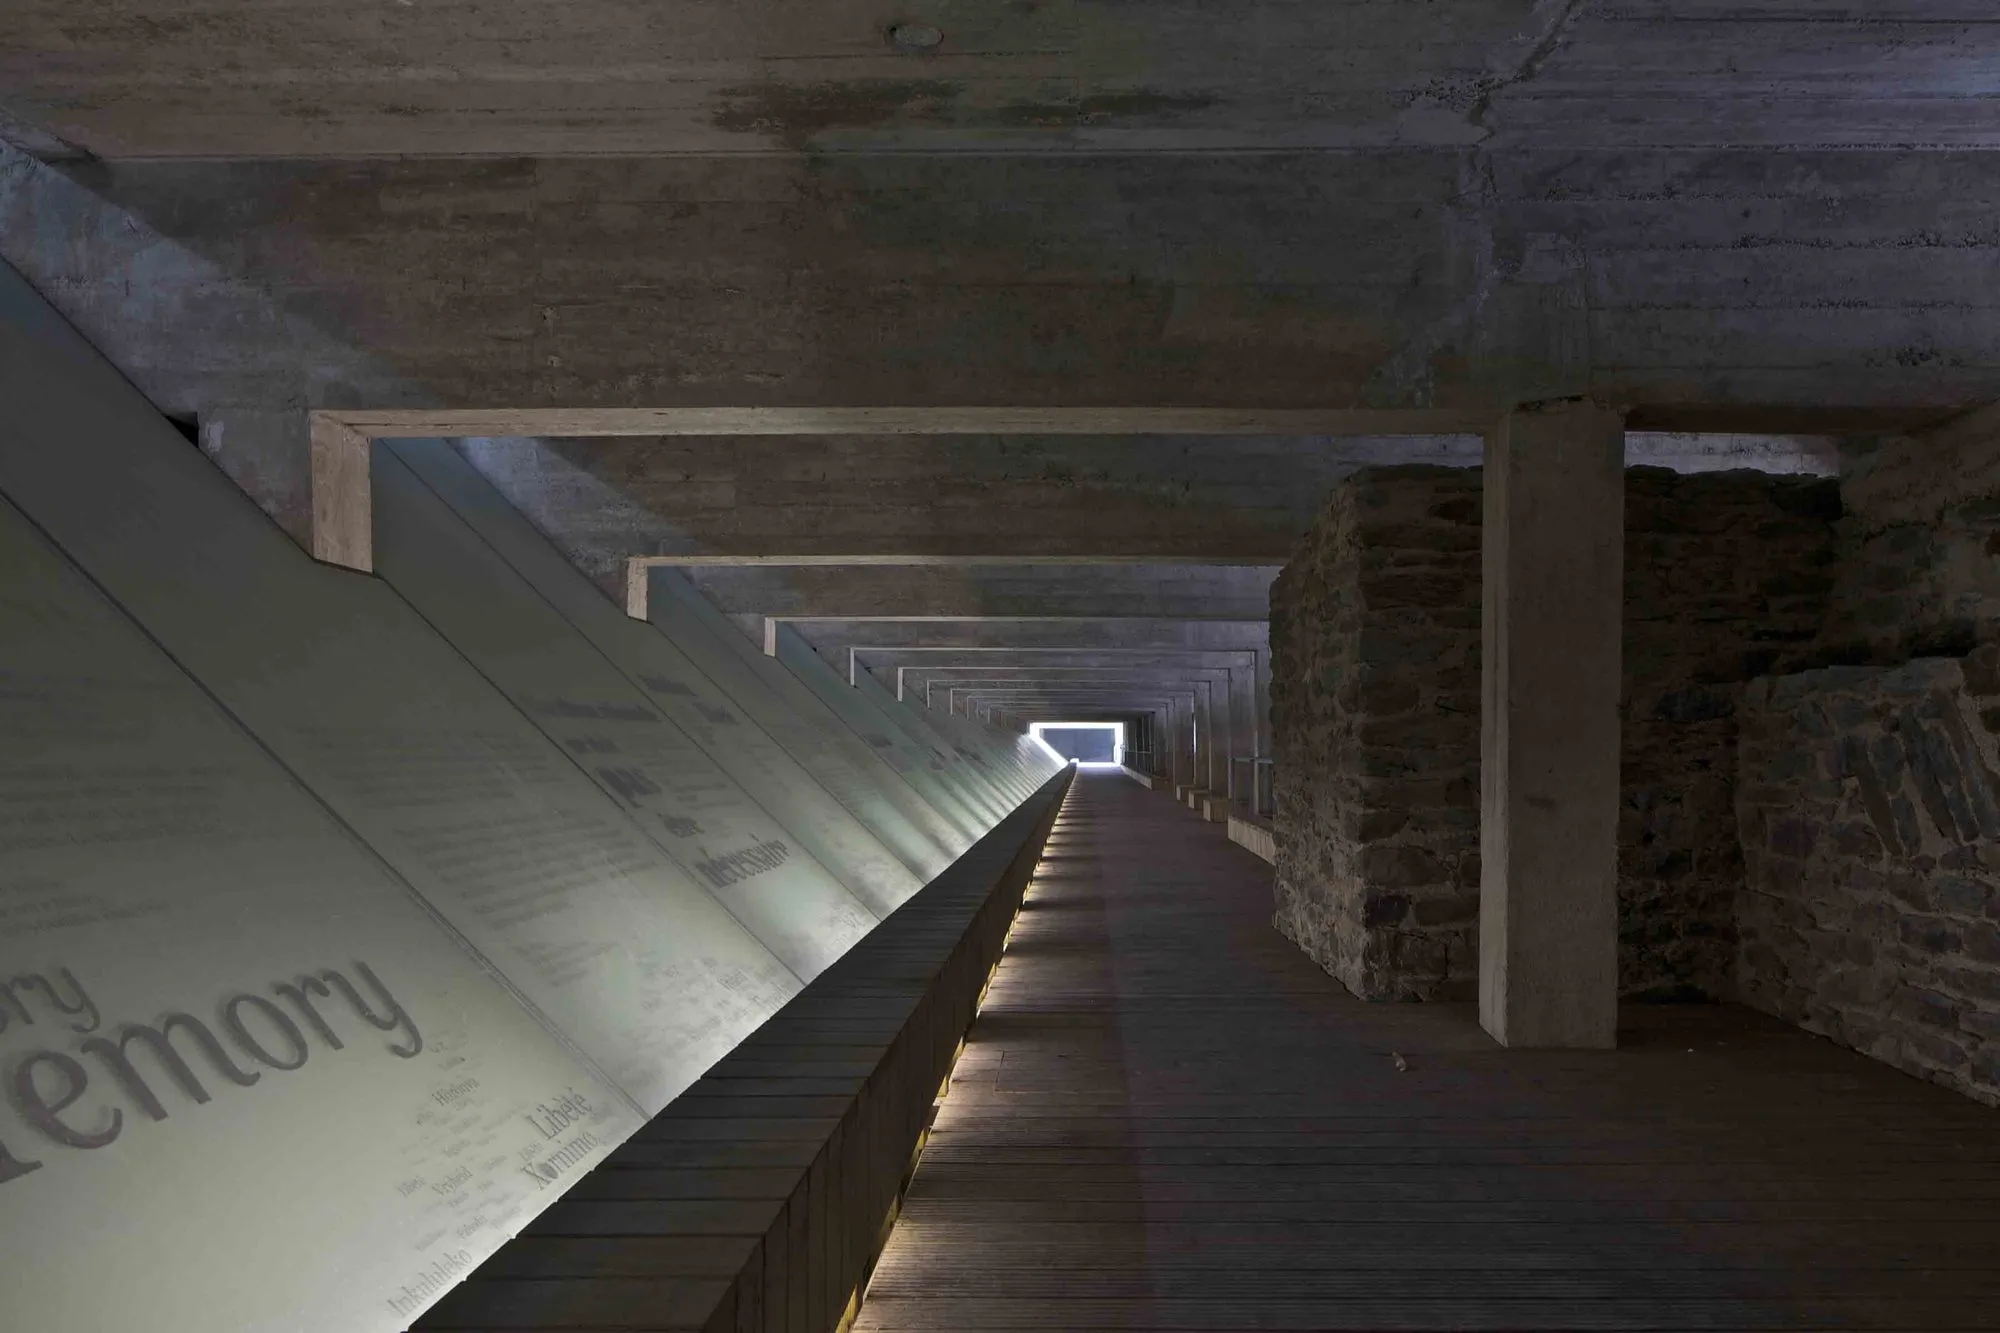 Slavery Memorial in France, Europe | Architecture - Rated 3.5